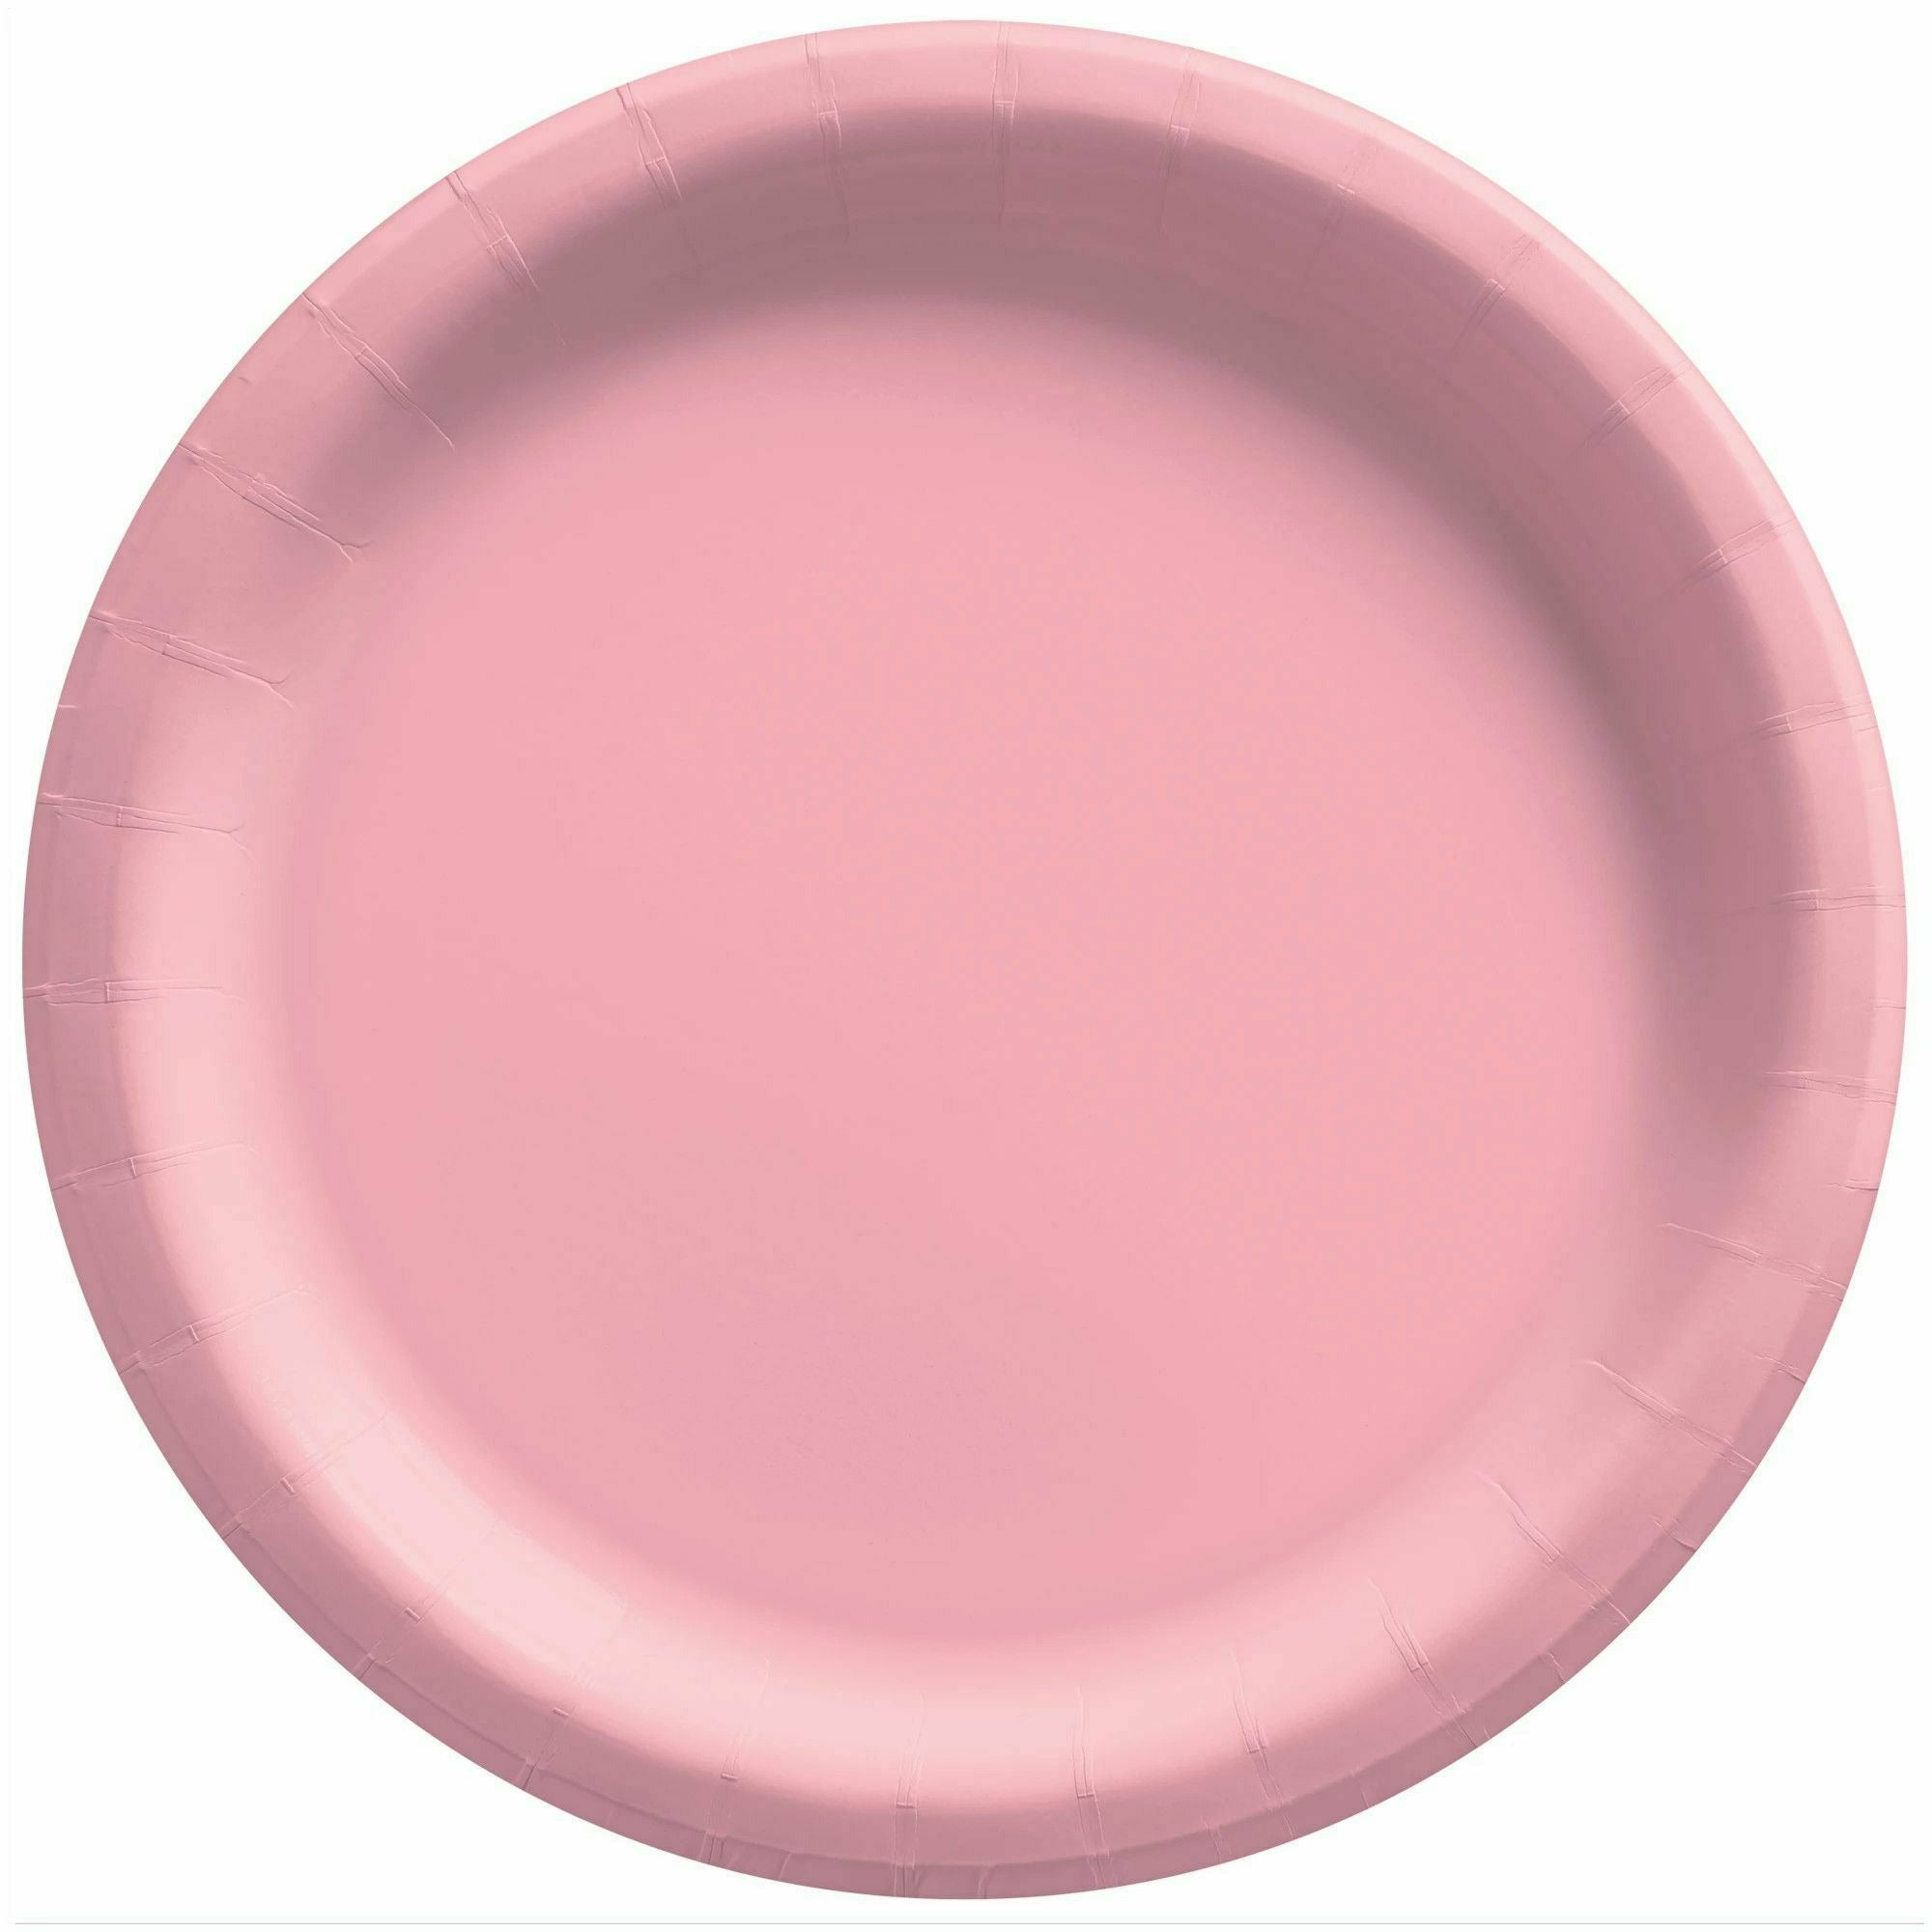 Amscan BASIC New Pink - 8 1/2" Round Paper Plates, 50 Ct.